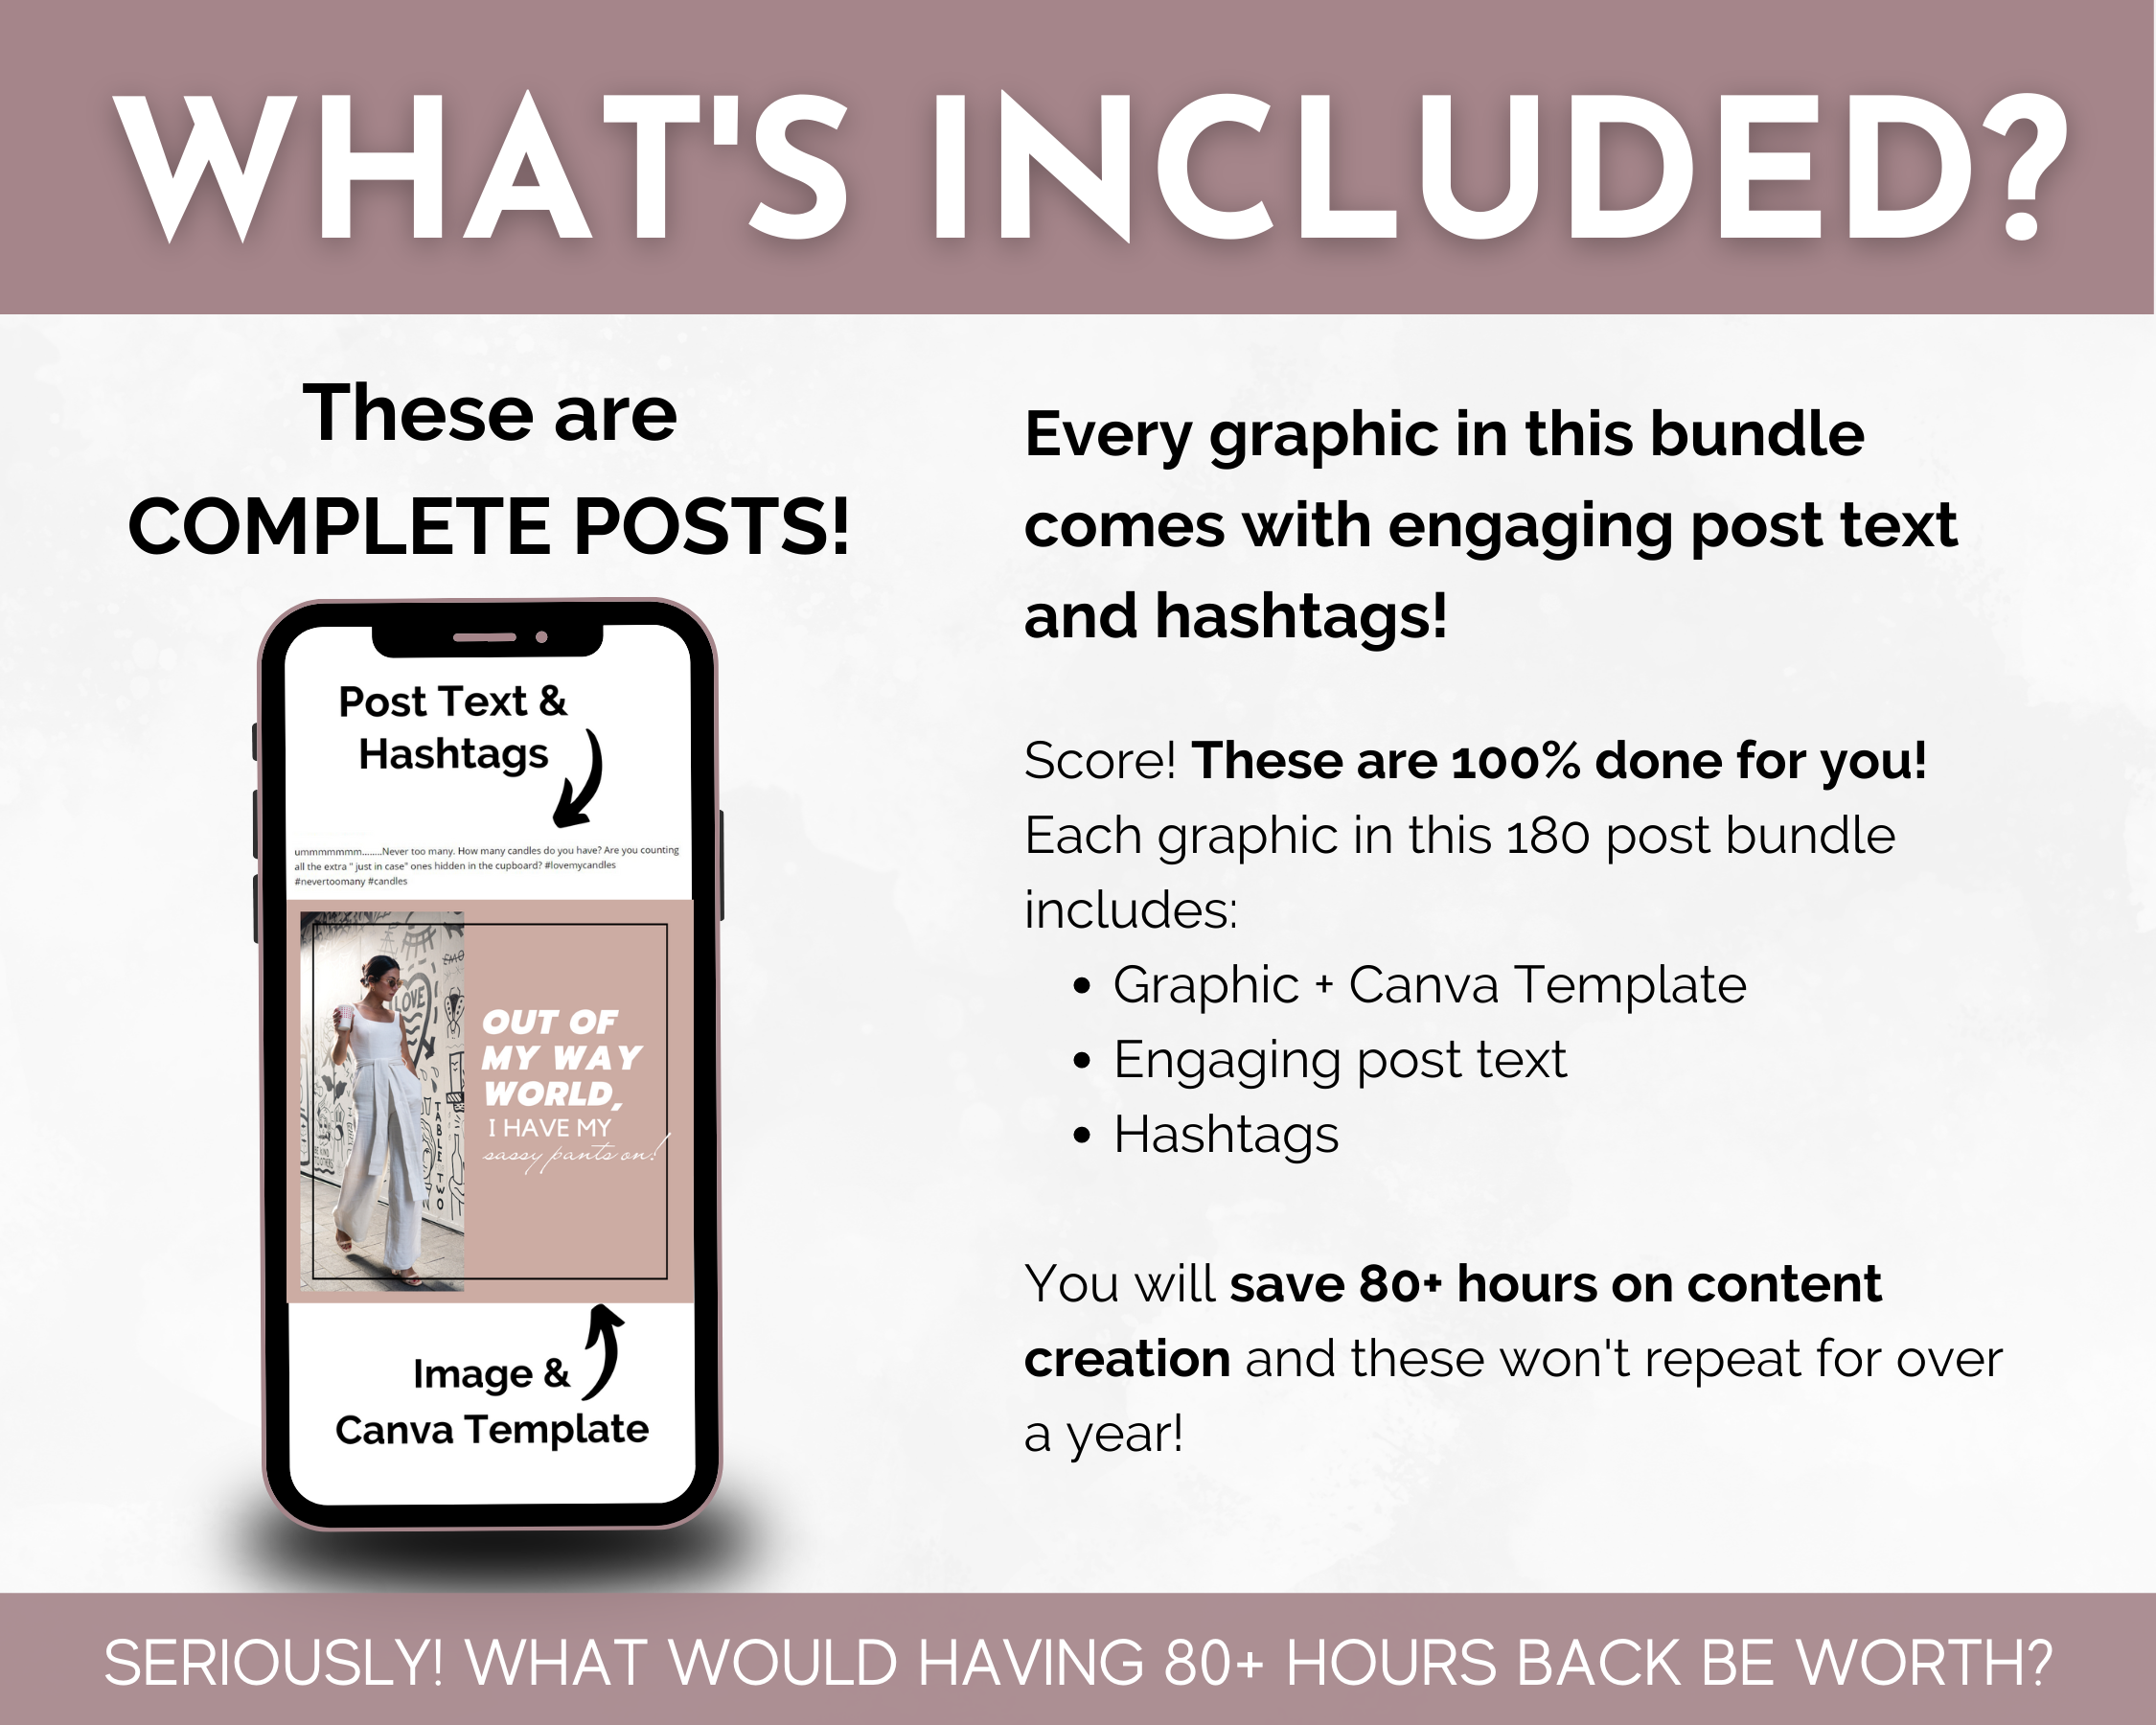 What's included in this package are ready-to-post text captions for Social Media images from the Boutique & Style Store Social Media Post Bundle with Canva Templates by Socially Inclined.